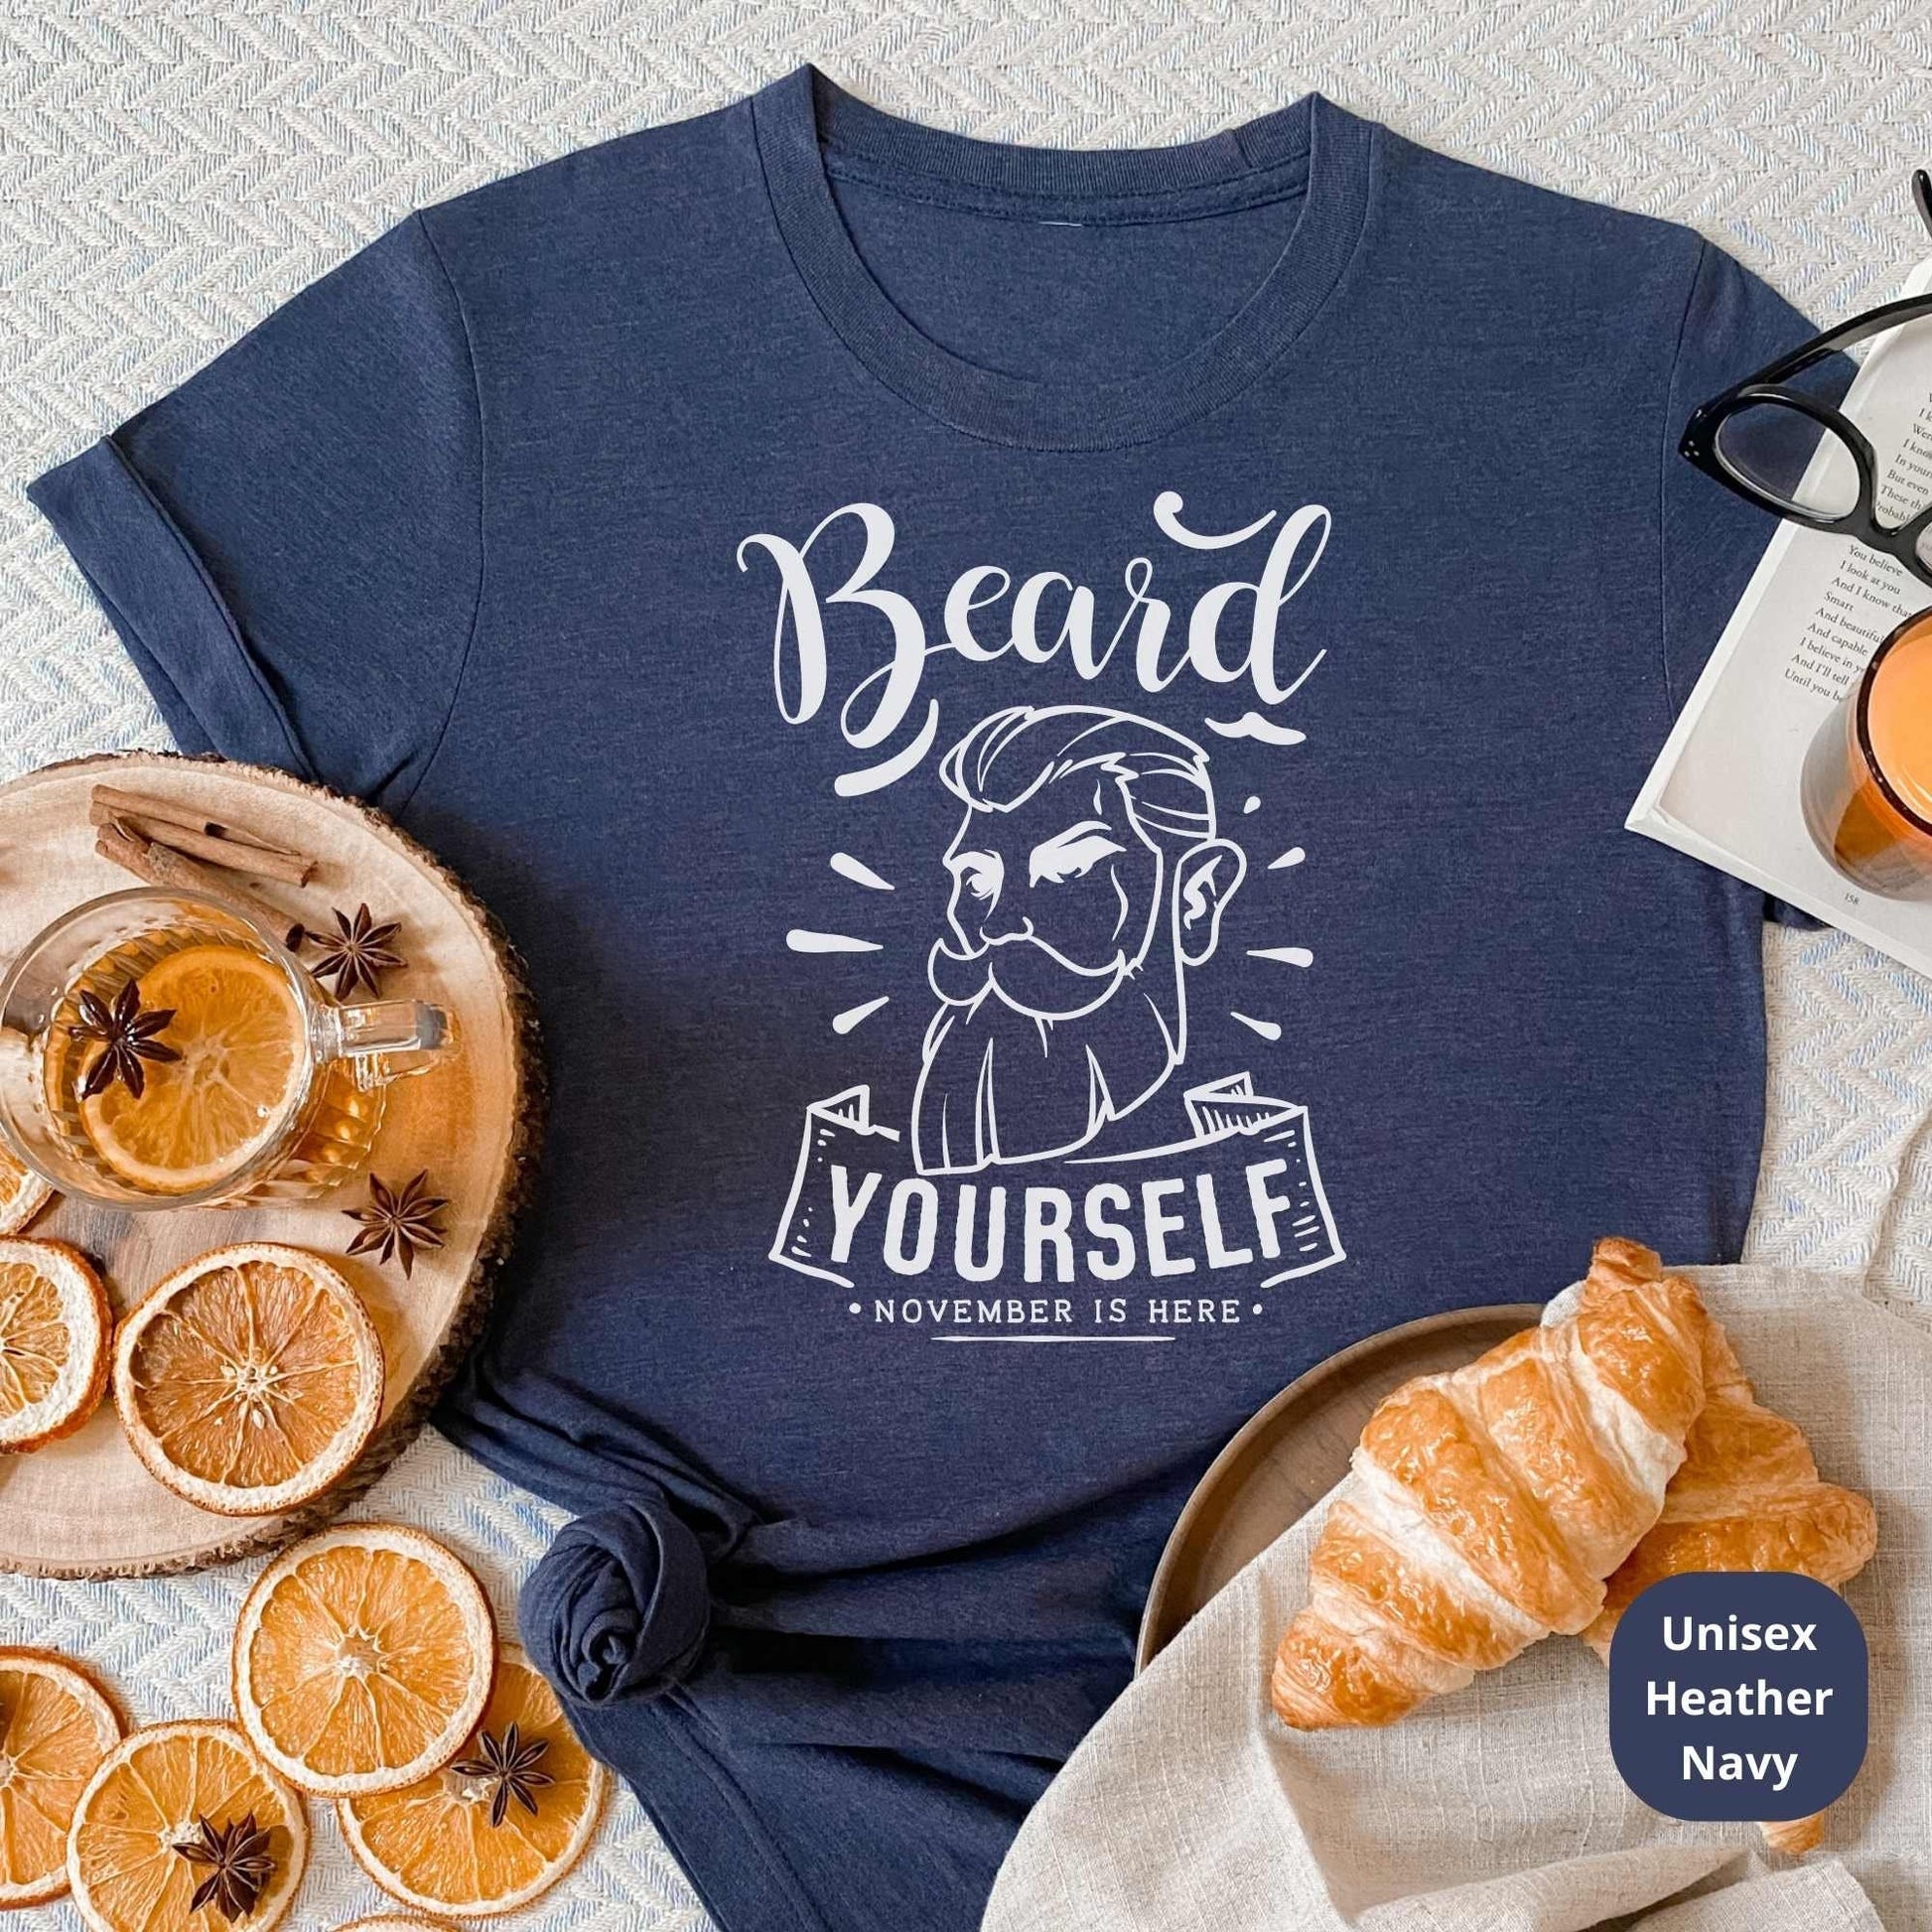 Beard Yourself Shirt - Funny Beard Lover Shirt for New Dad Gift - Father Gift - Christmas Gift - Fathers Day Gift - Birthday Gift for Dad HMDesignStudioUS